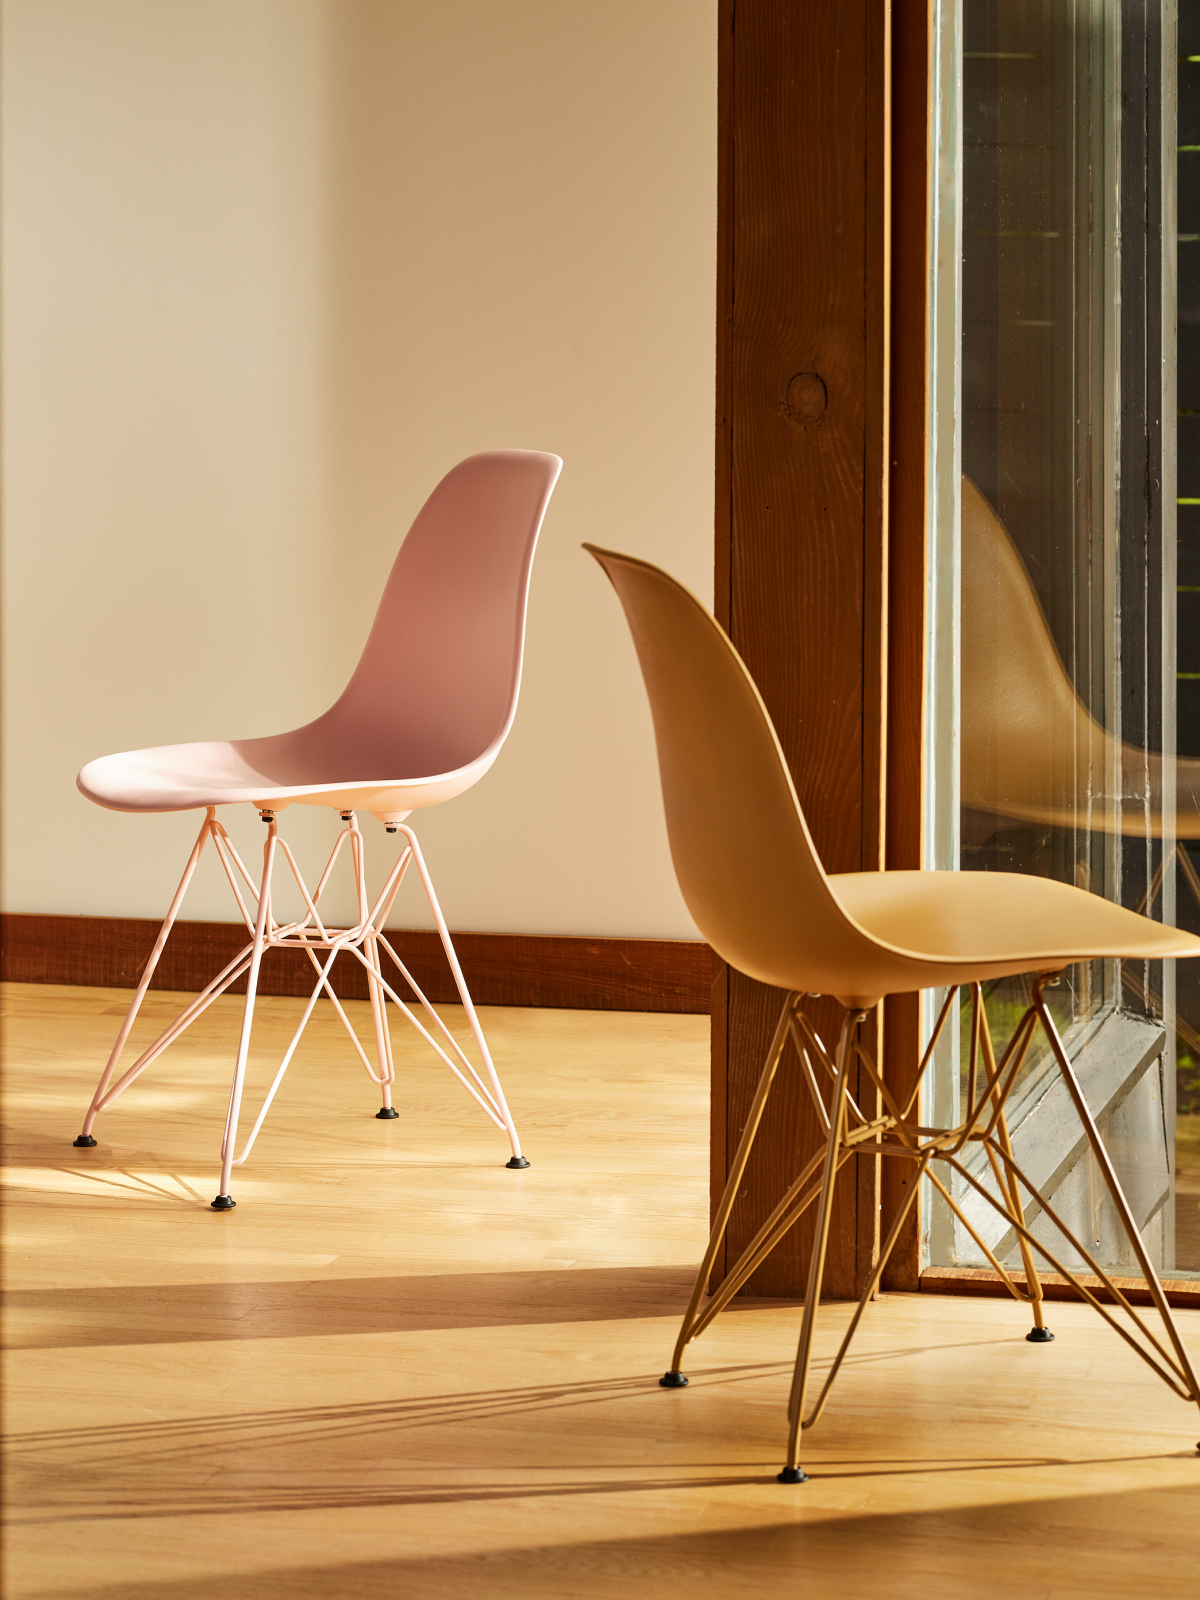 Herman Miller x HAY Eames Molded Plastic Chairs in pink and toffee.